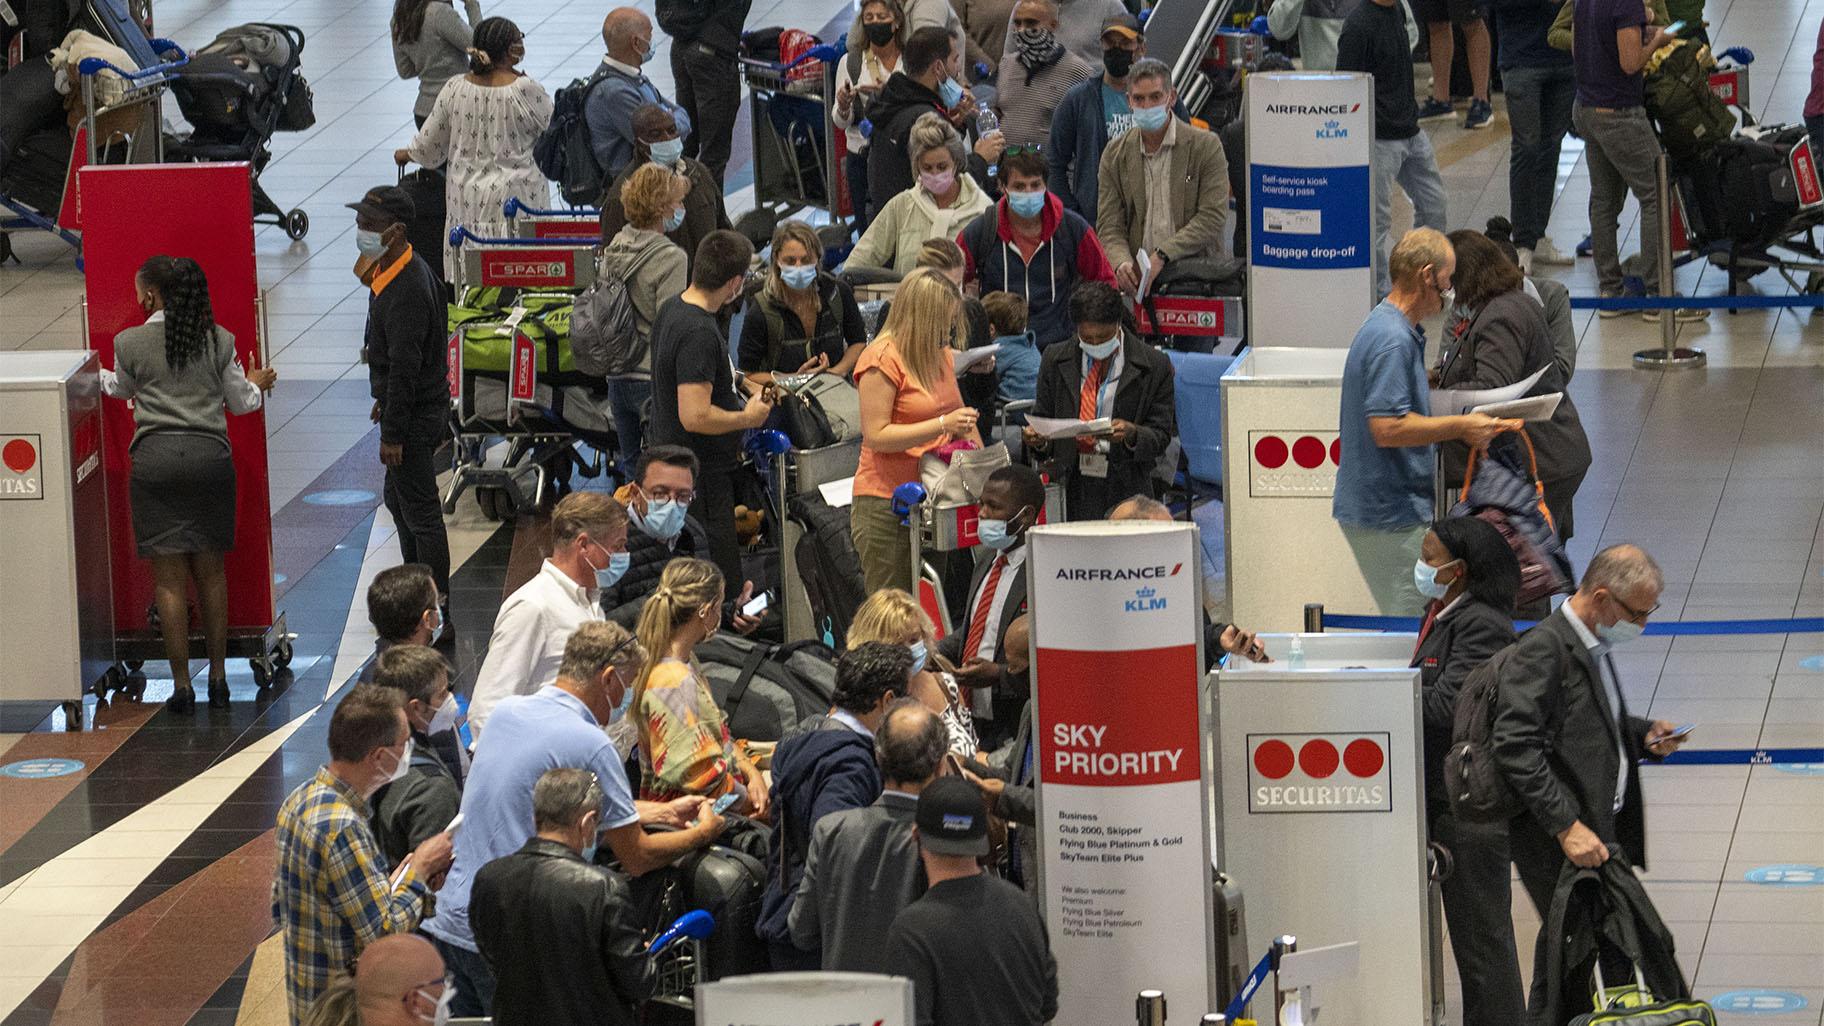  People queue to get on the Air France flight to Paris at OR Tambo's airport in Johannesburg, South Africa, Nov. 26, 2021. (AP Photo / Jerome Delay, File)